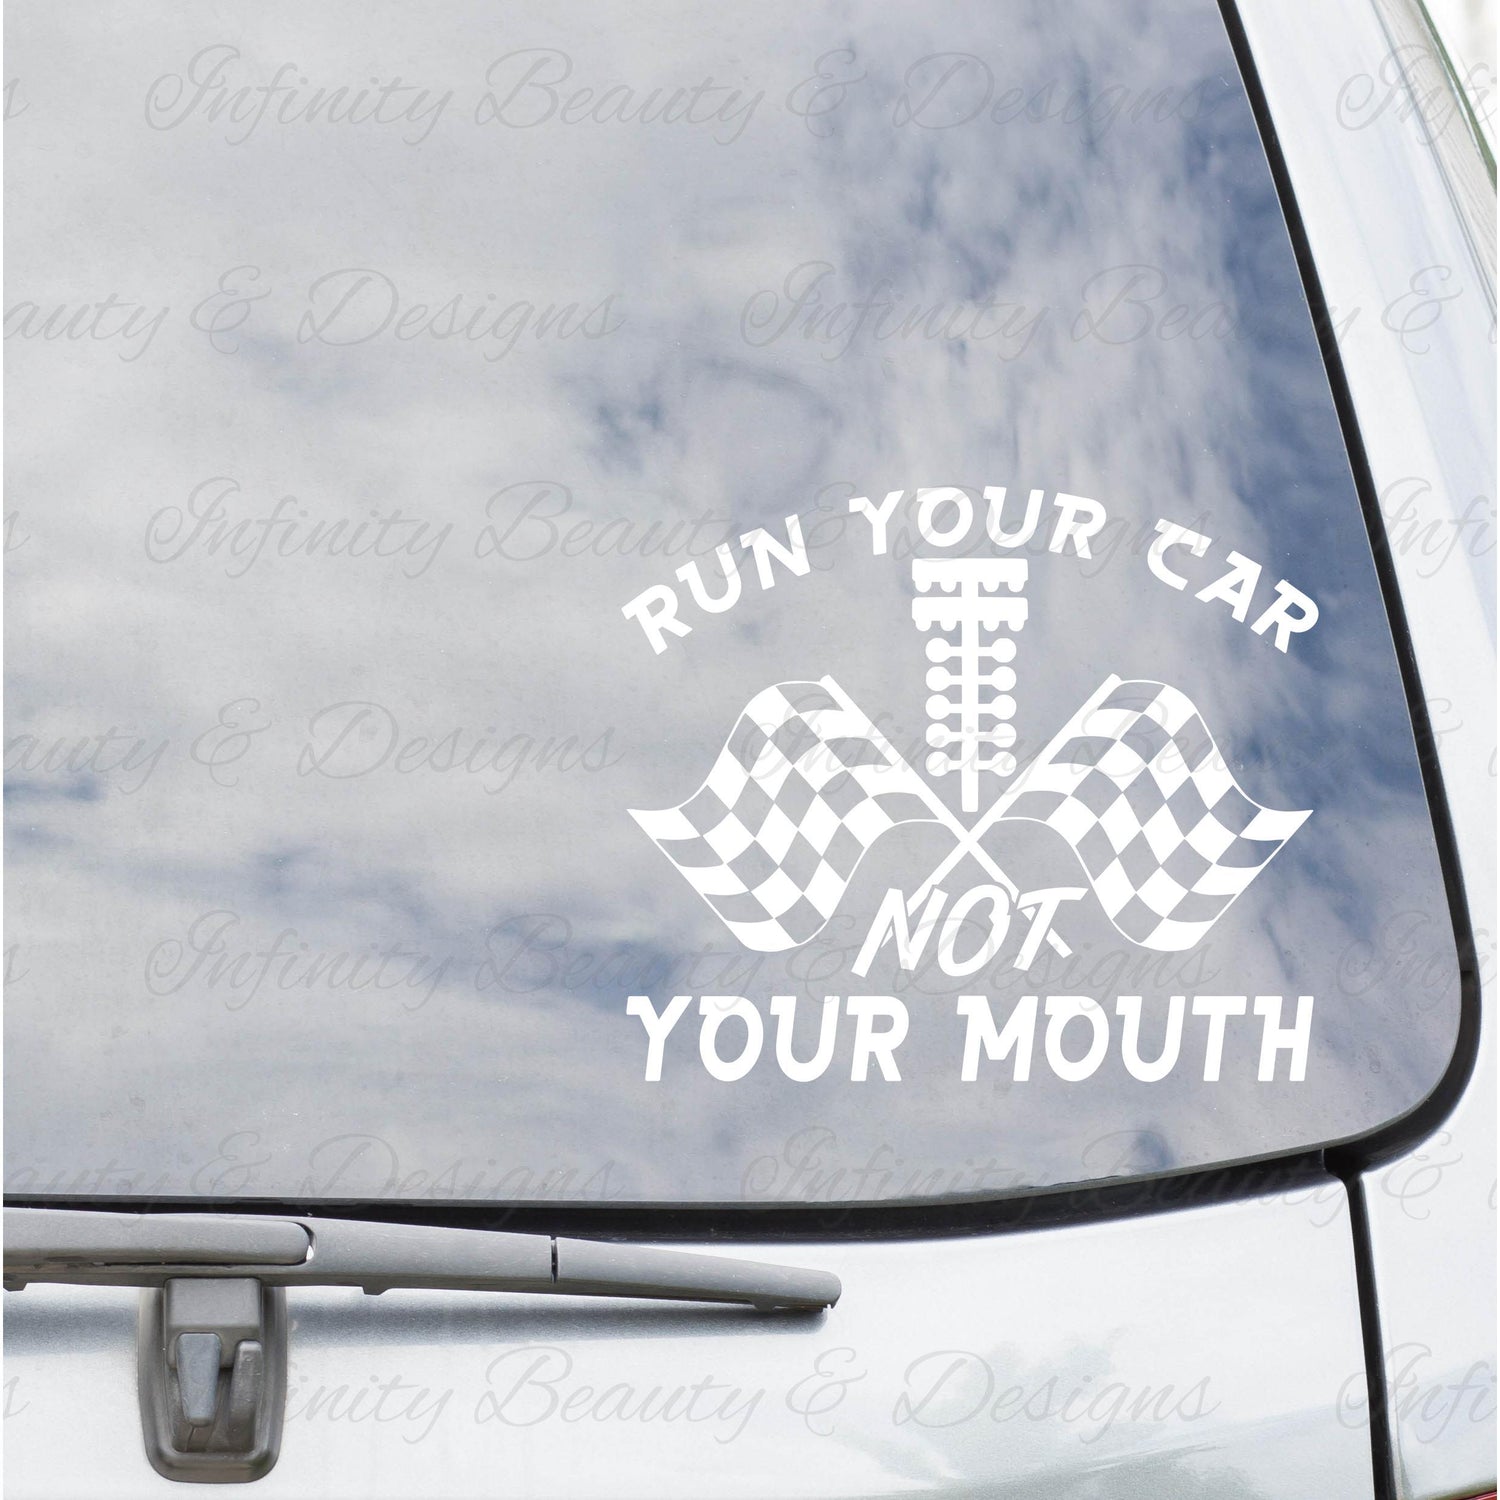 Run Your Car Not Your Mouth Decal-Infinity Beauty & Designs